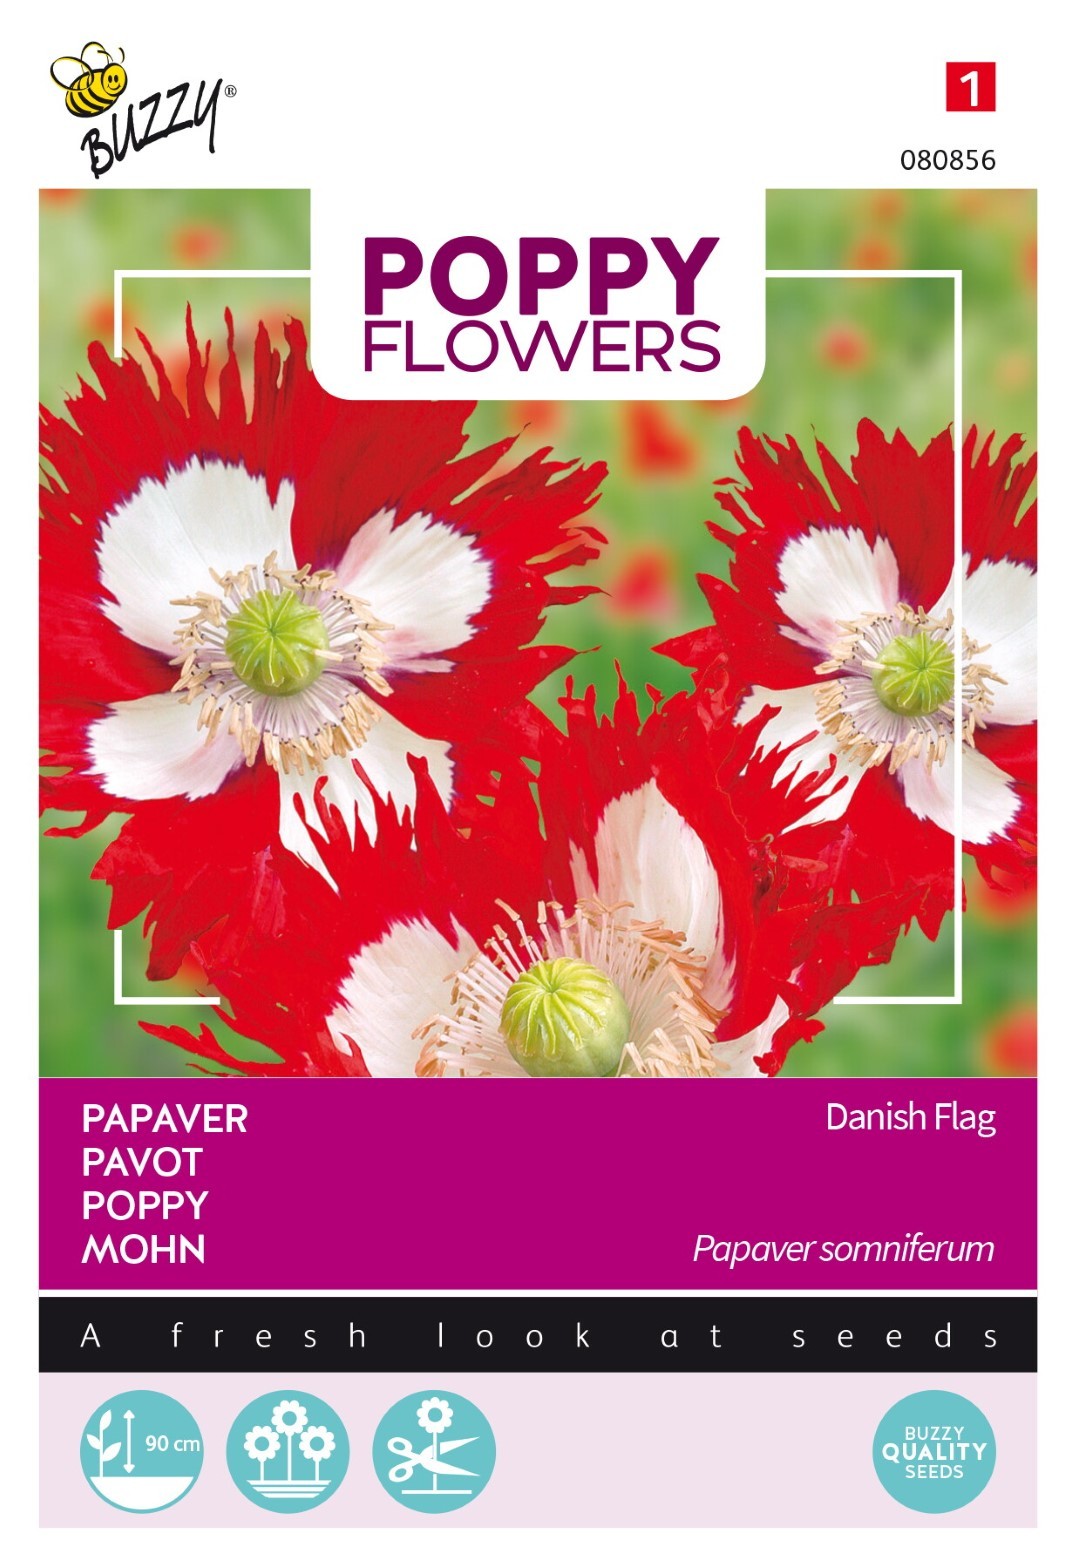 Buzzy® Poppies of the world - Papaver Deense Vlag